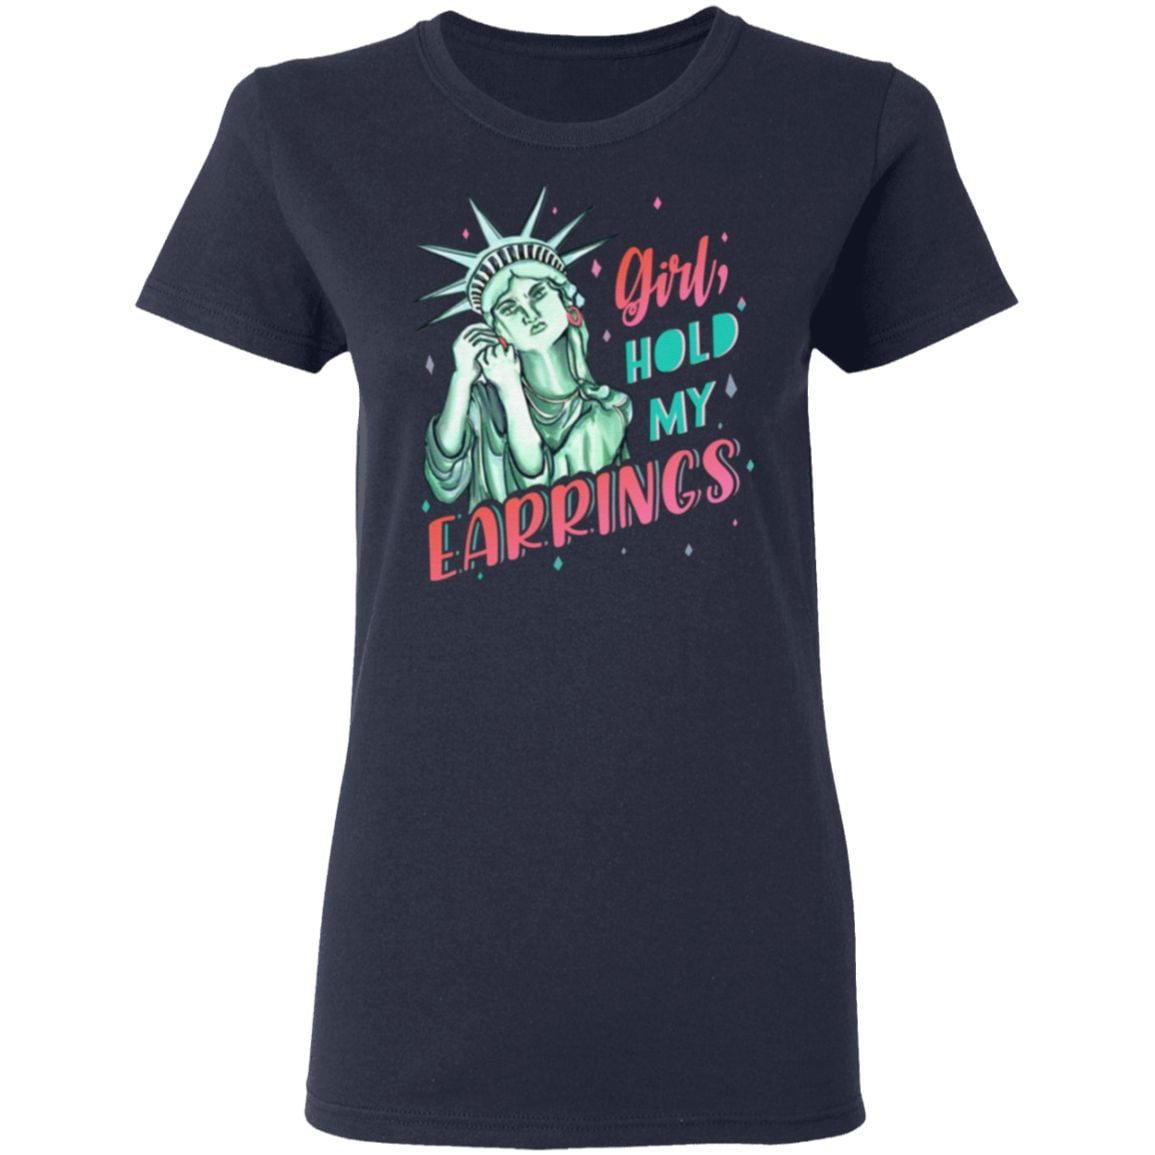 Feminist NYC Statue of Liberty Girl Hold My Earrings Anti Trump T-Shirt